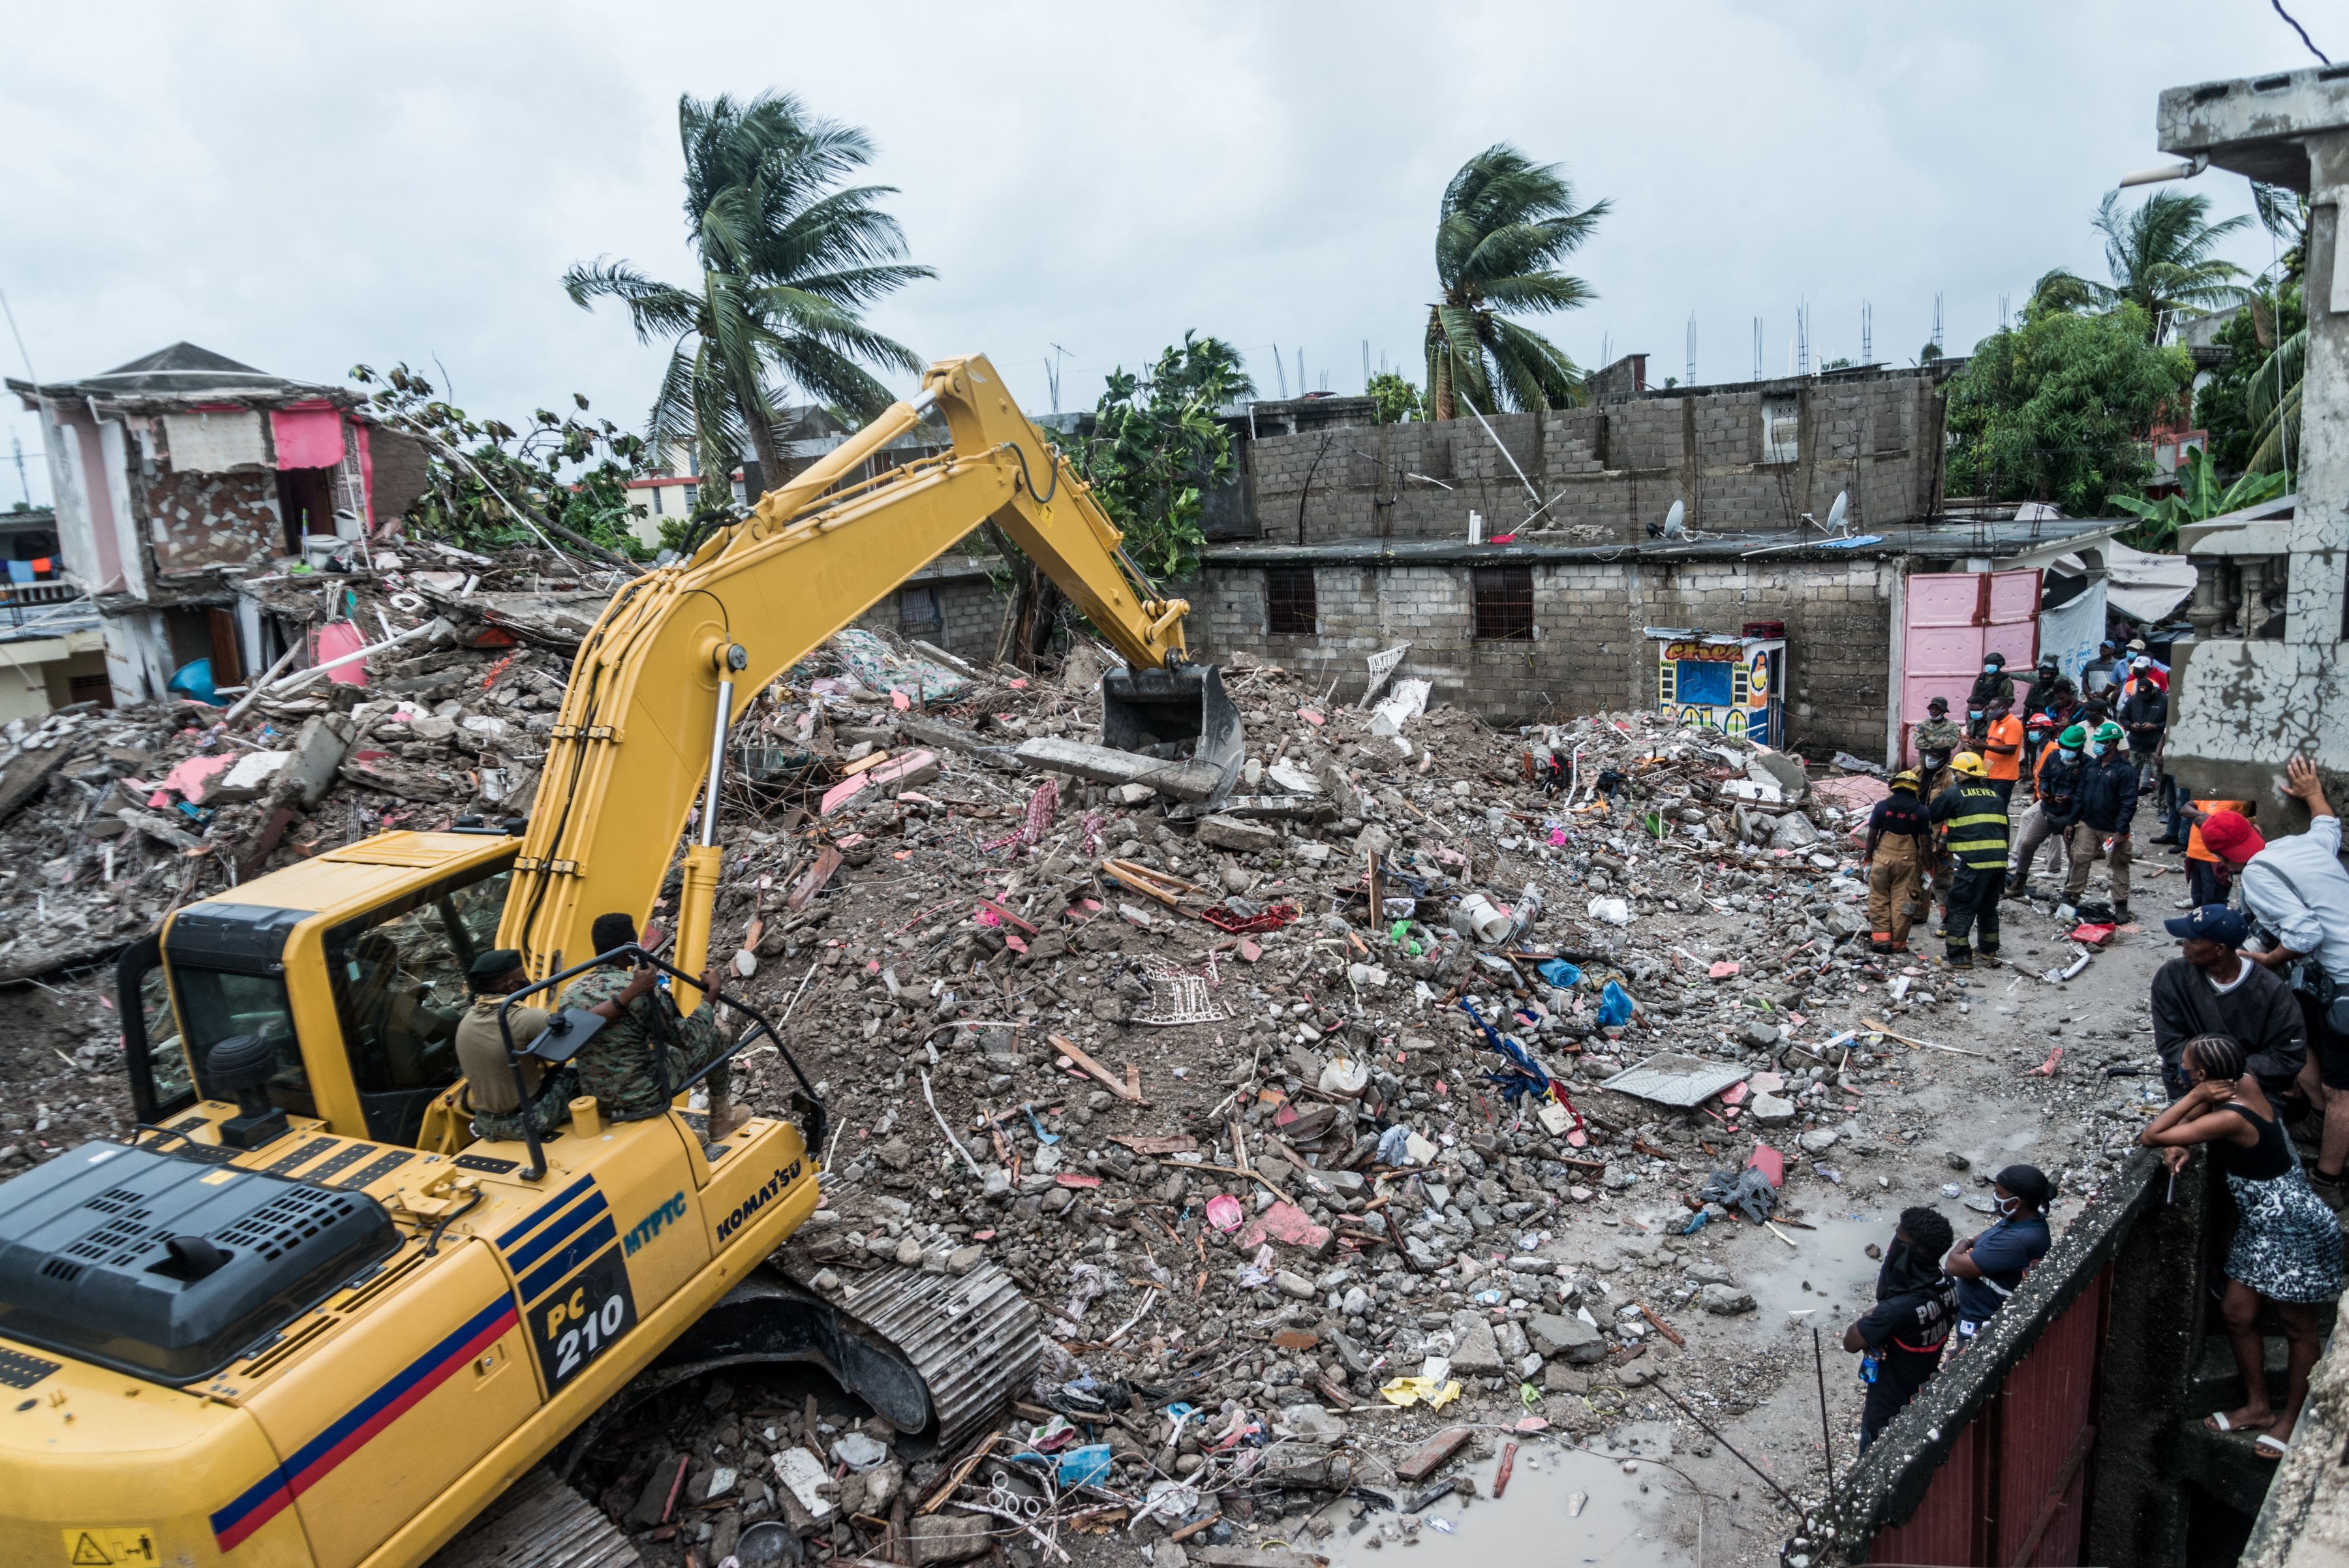  A bulldozer clears the rubble of a building that collapsed in the earthquake in Brefet, Haiti, on Aug. 17.